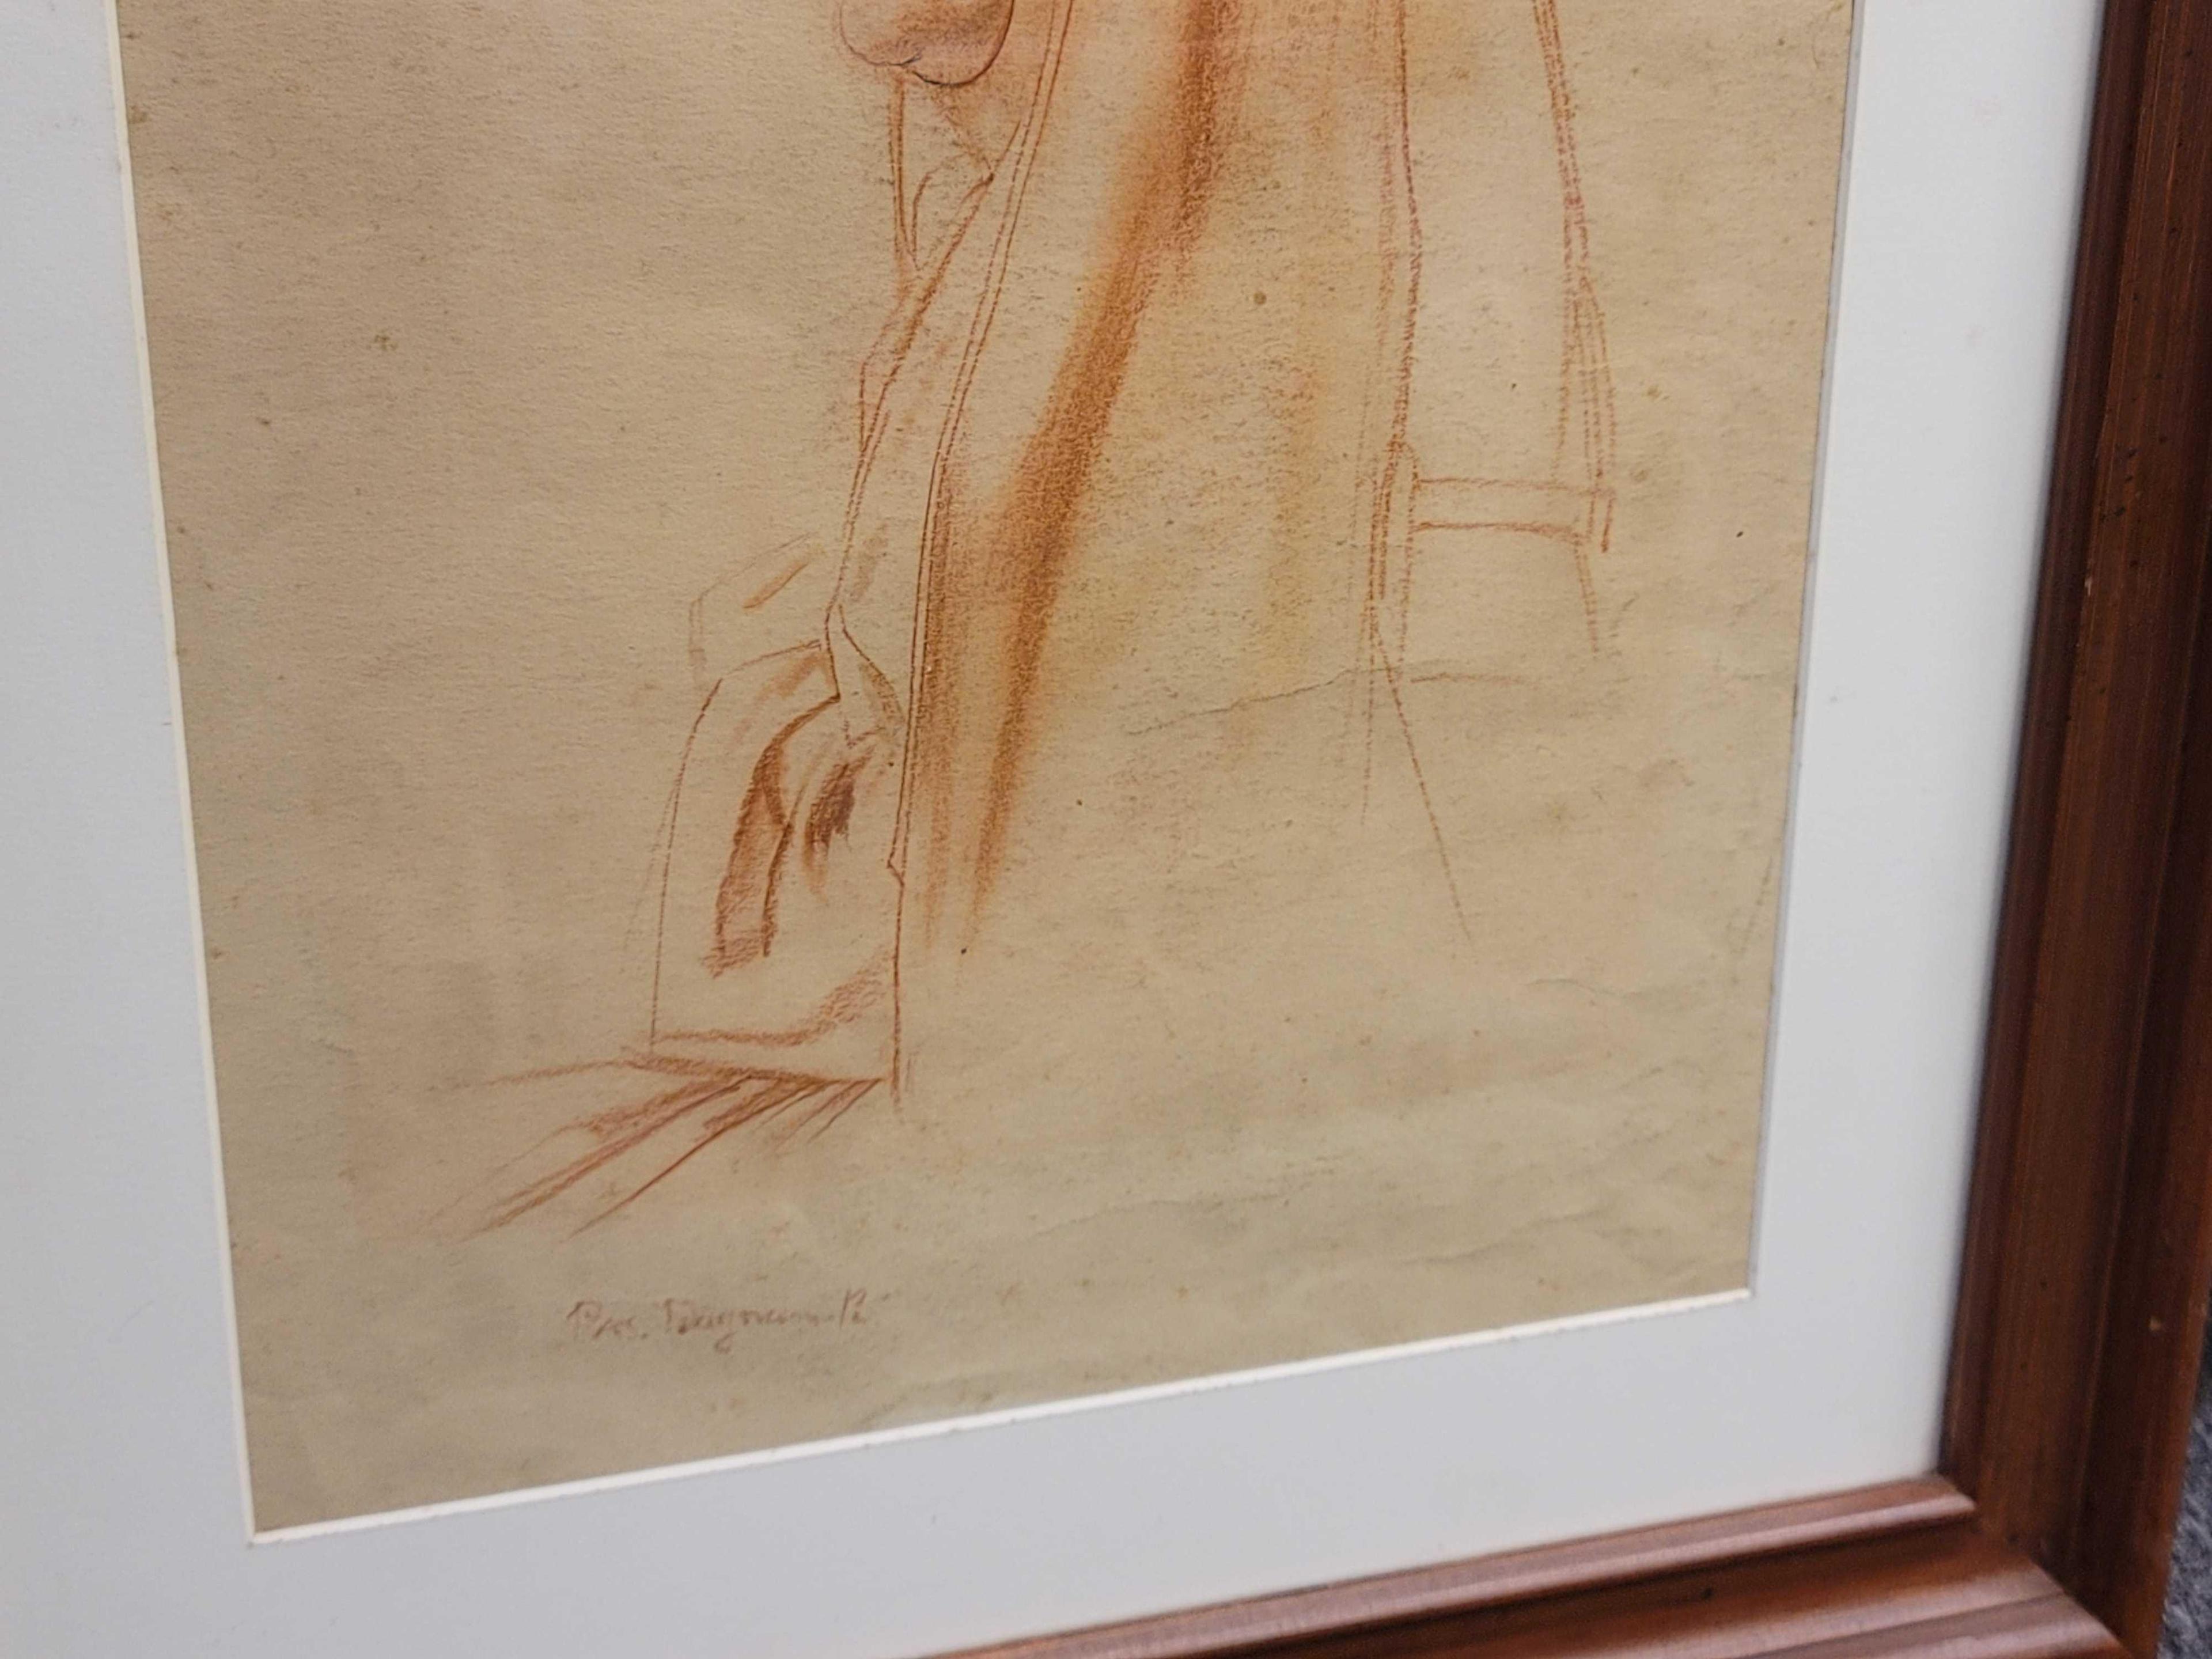 PASCAL ADOLPHE JEAN DAGNON BOUVERET SANGUINE SKETCH. SIGNED ON THE BOTTOM BY THE ARTIST. THE ARTIST